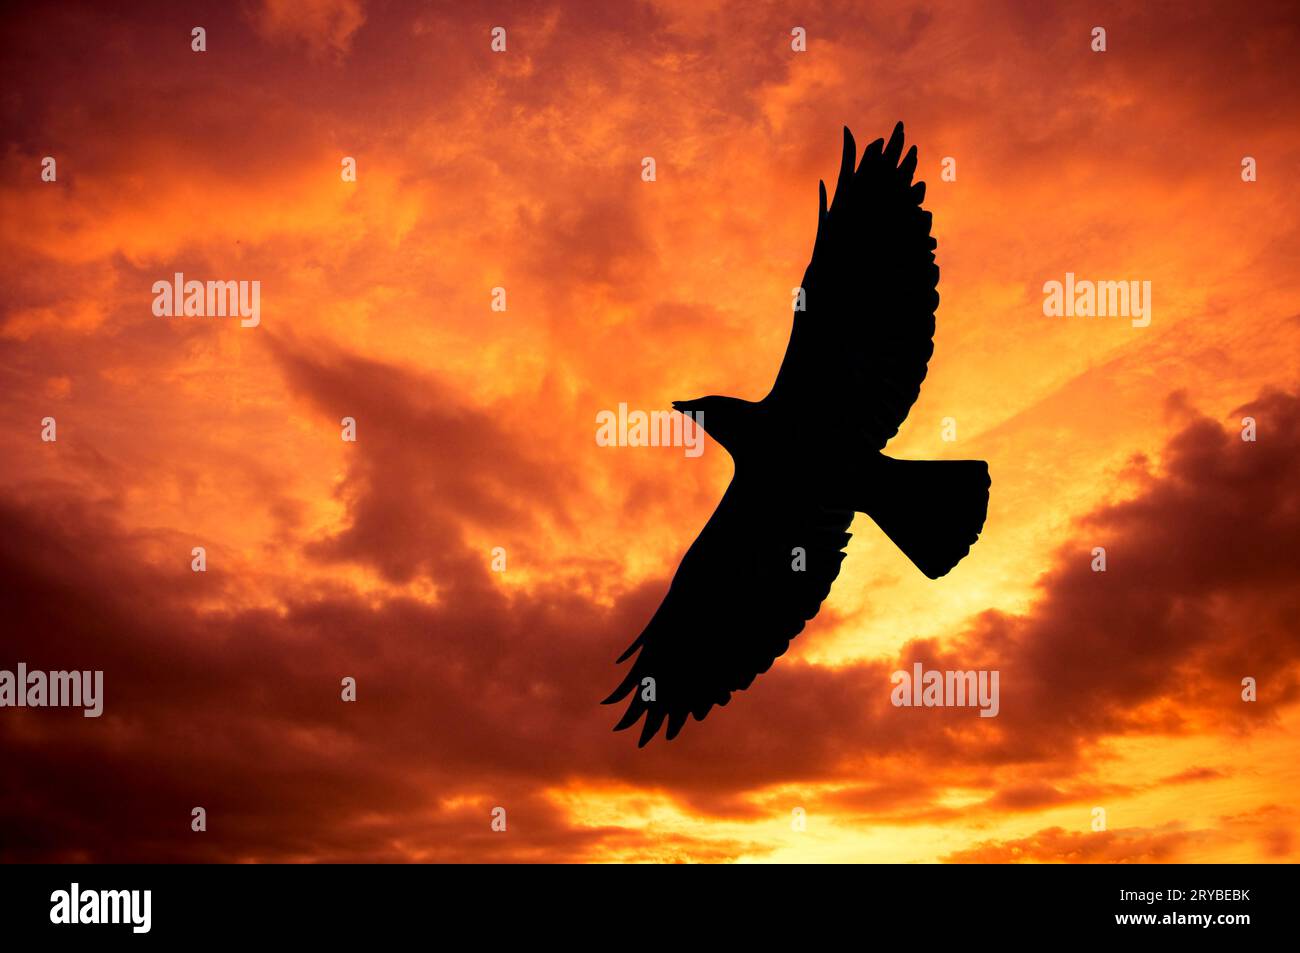 silhouette of a crow bird flying against a sunset sky Stock Photo